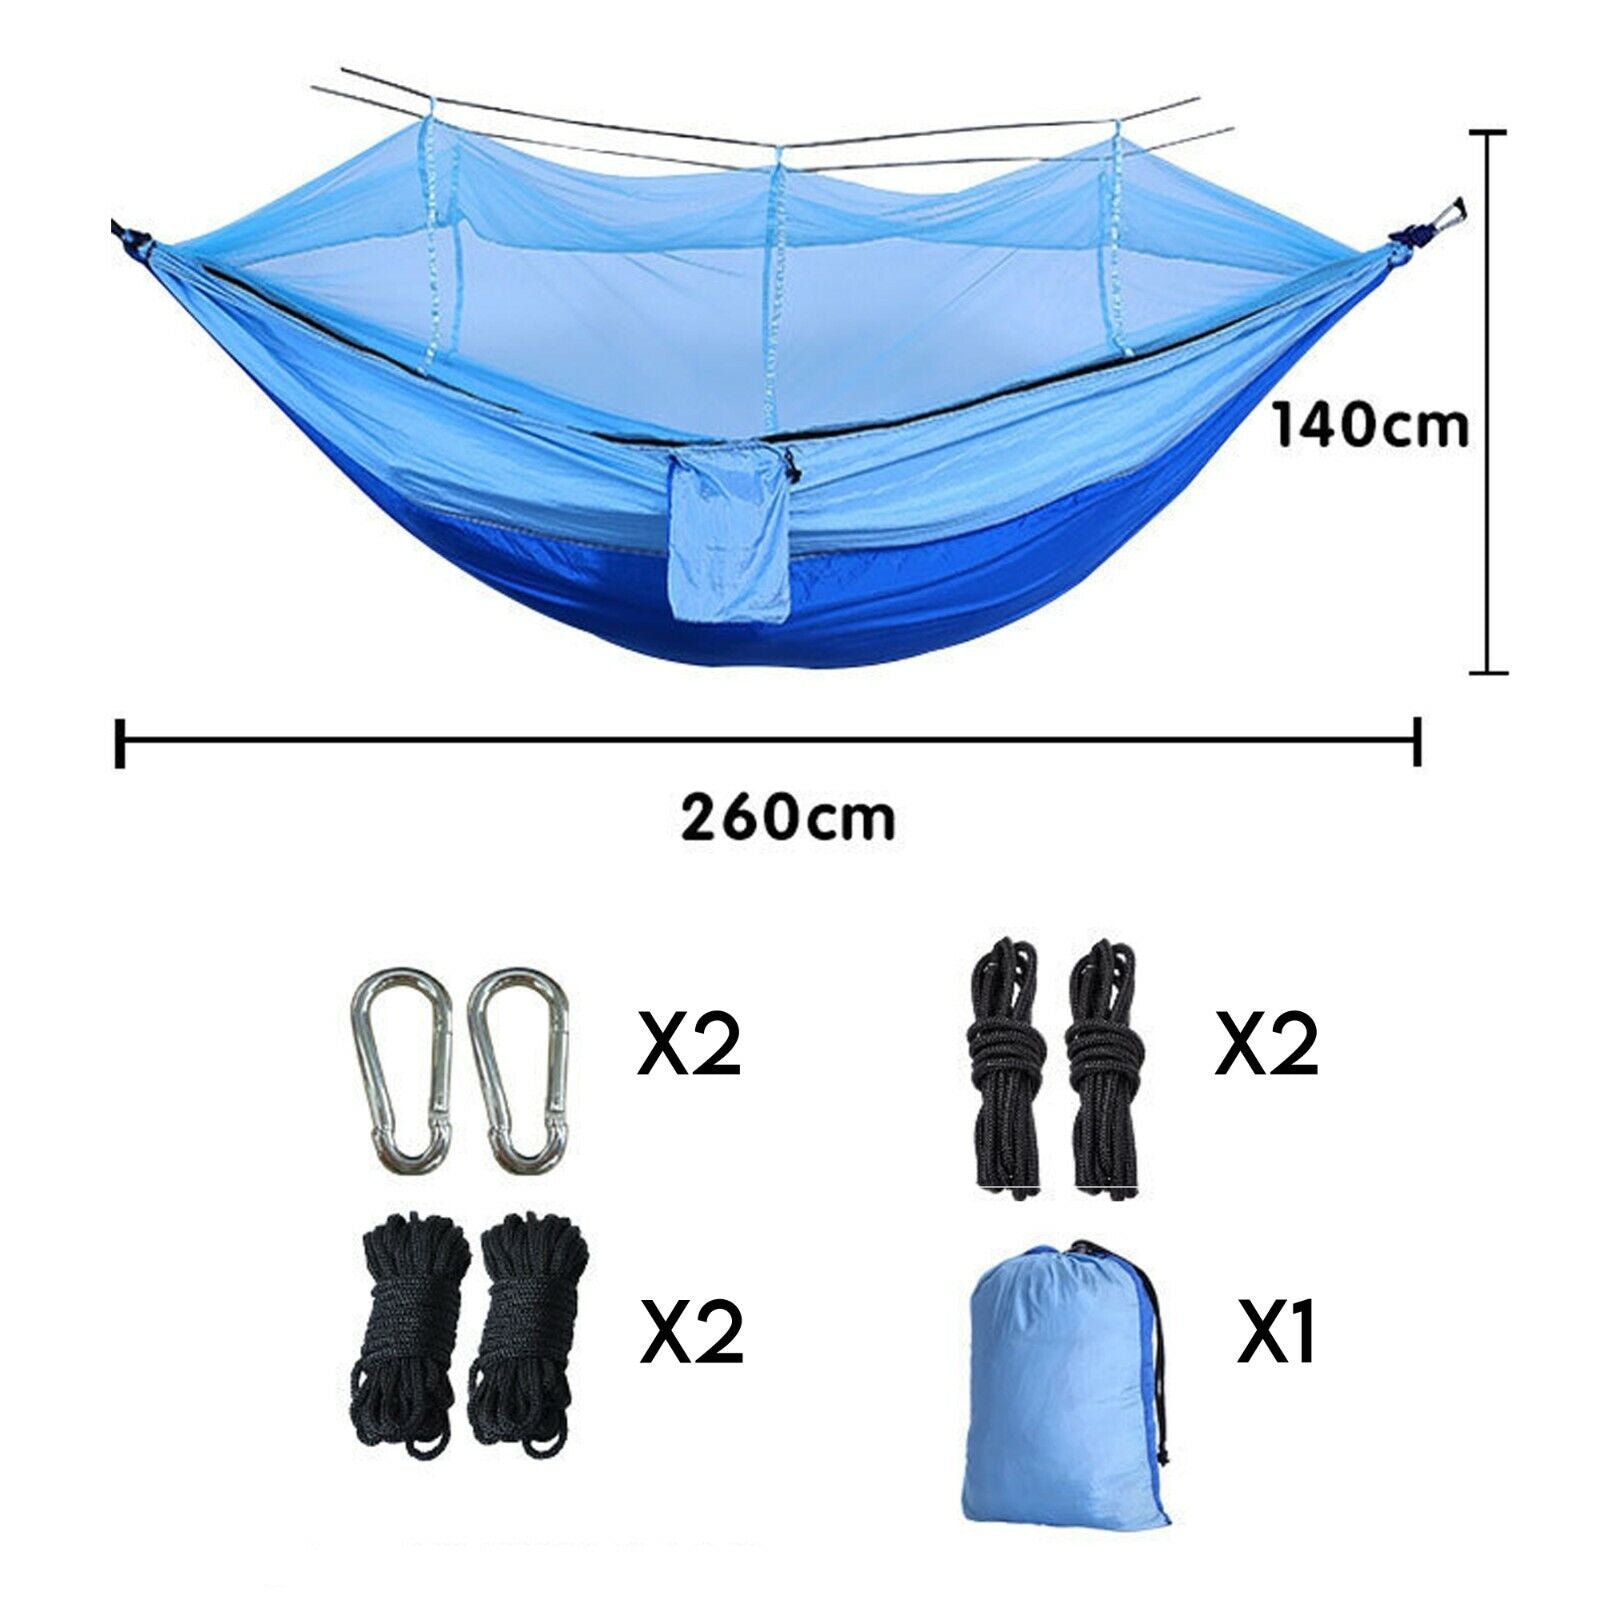 Double Hammock Outdoor with Mosquito Net Hanging Sleeping Bed Camping Hiking